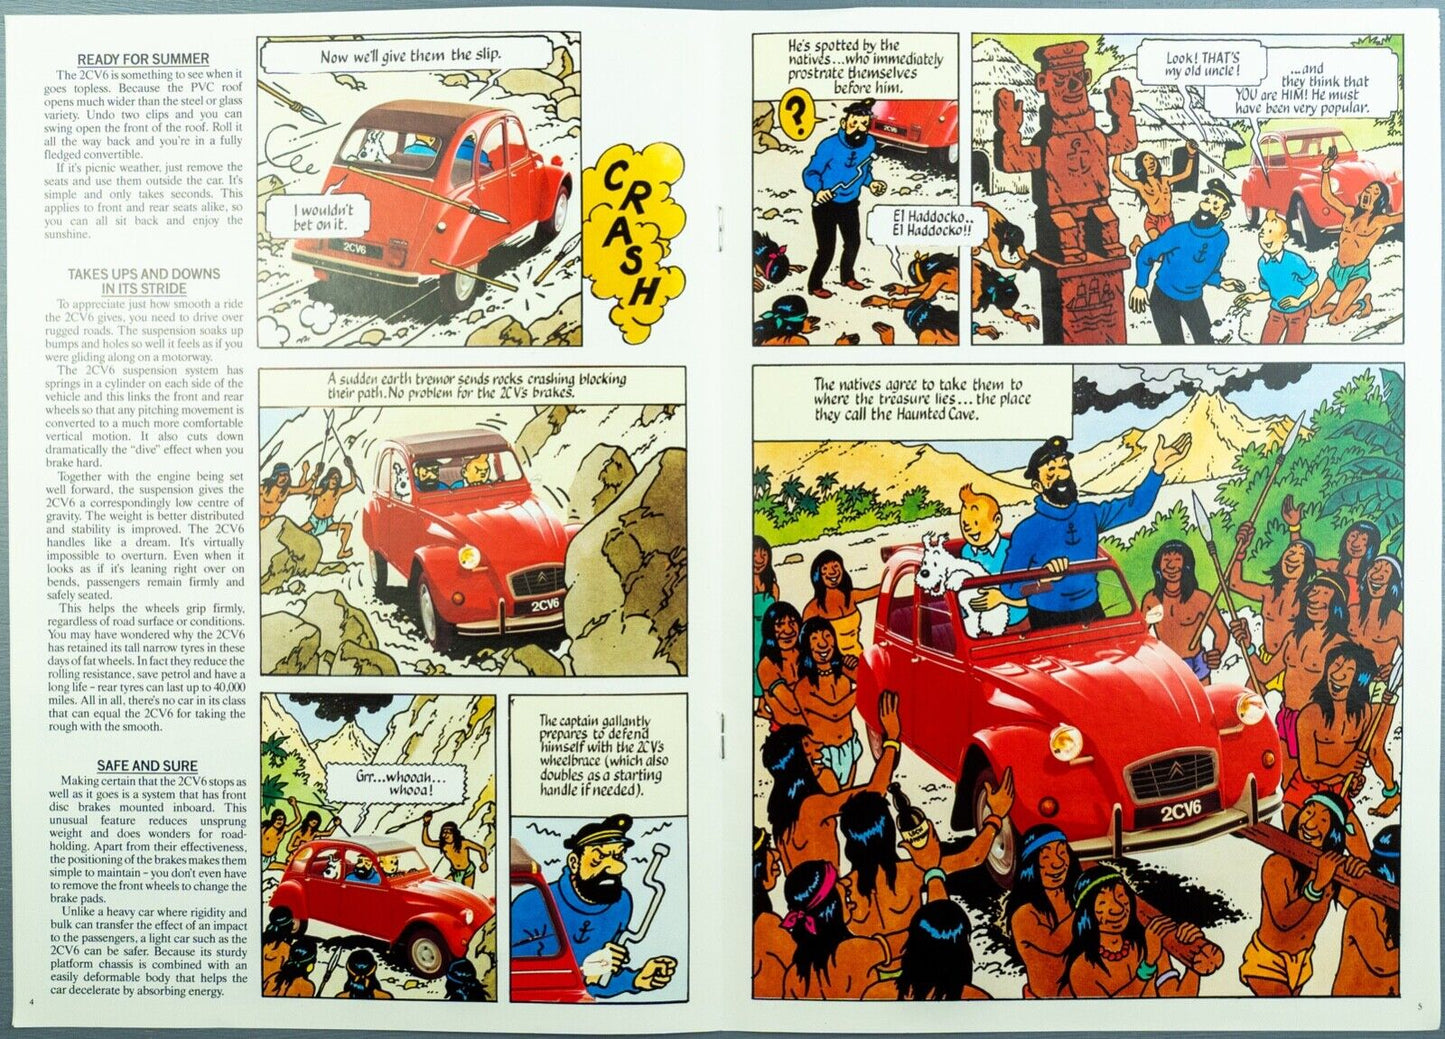 1988 Citroen Tintin Car Brochure: Adventures of 2CV6 and the Haunted Cave by Herge Comic